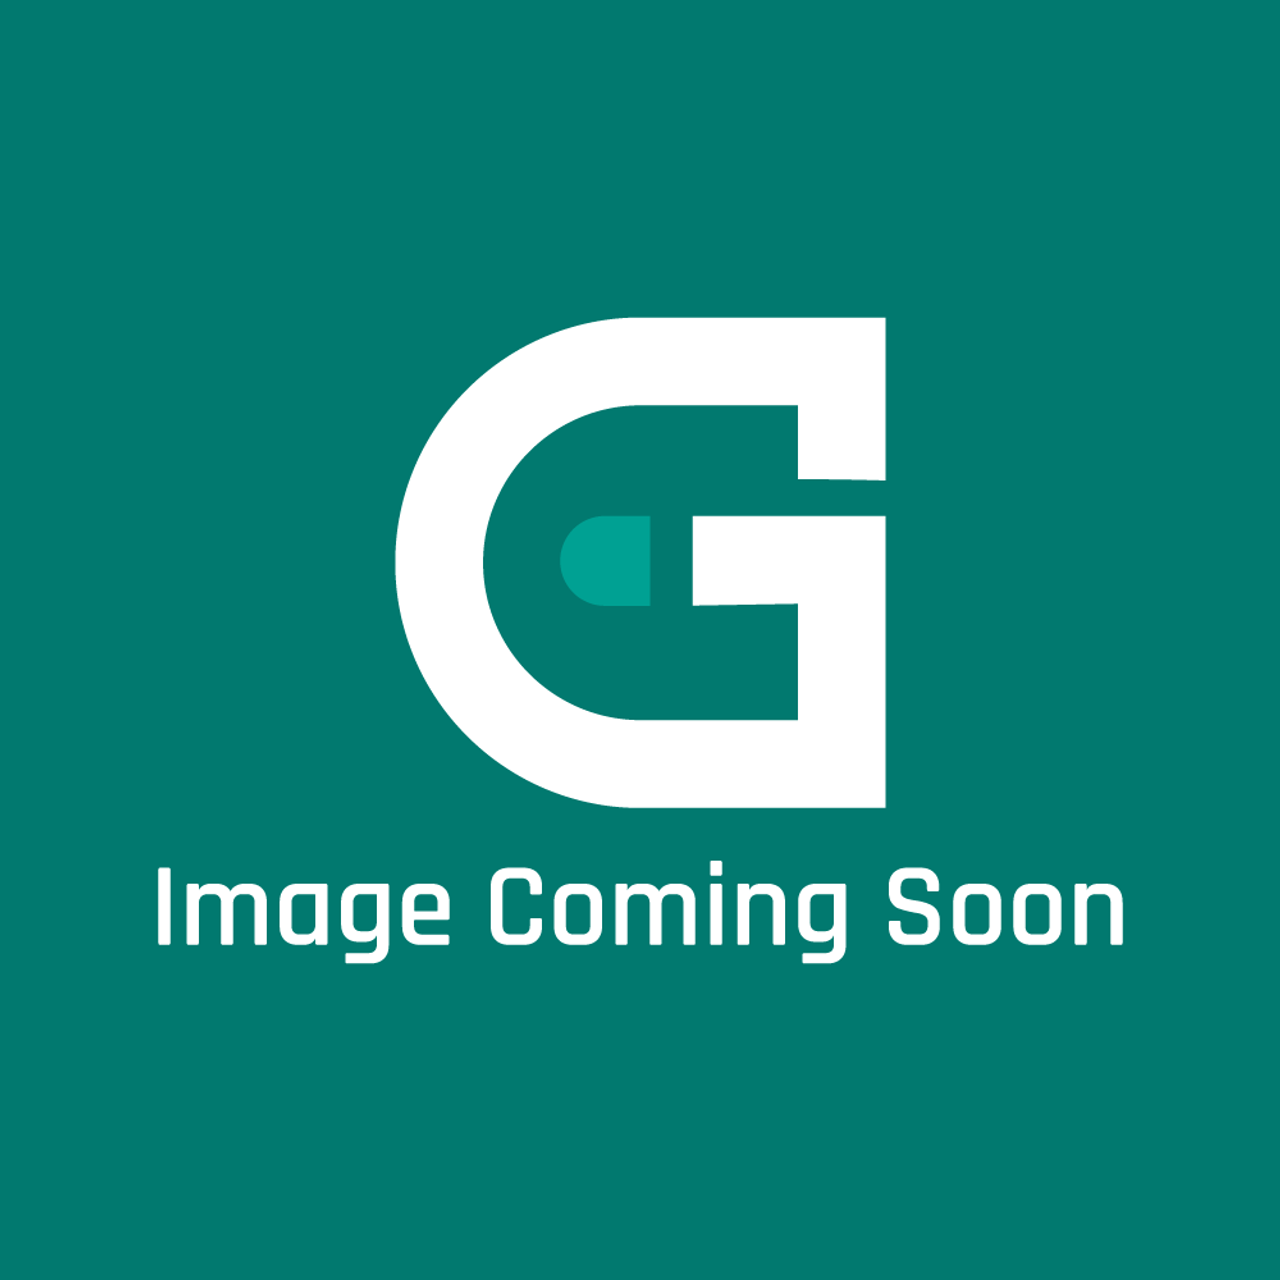 Frigidaire - Electrolux 140021726041 Panel - Image Coming Soon!